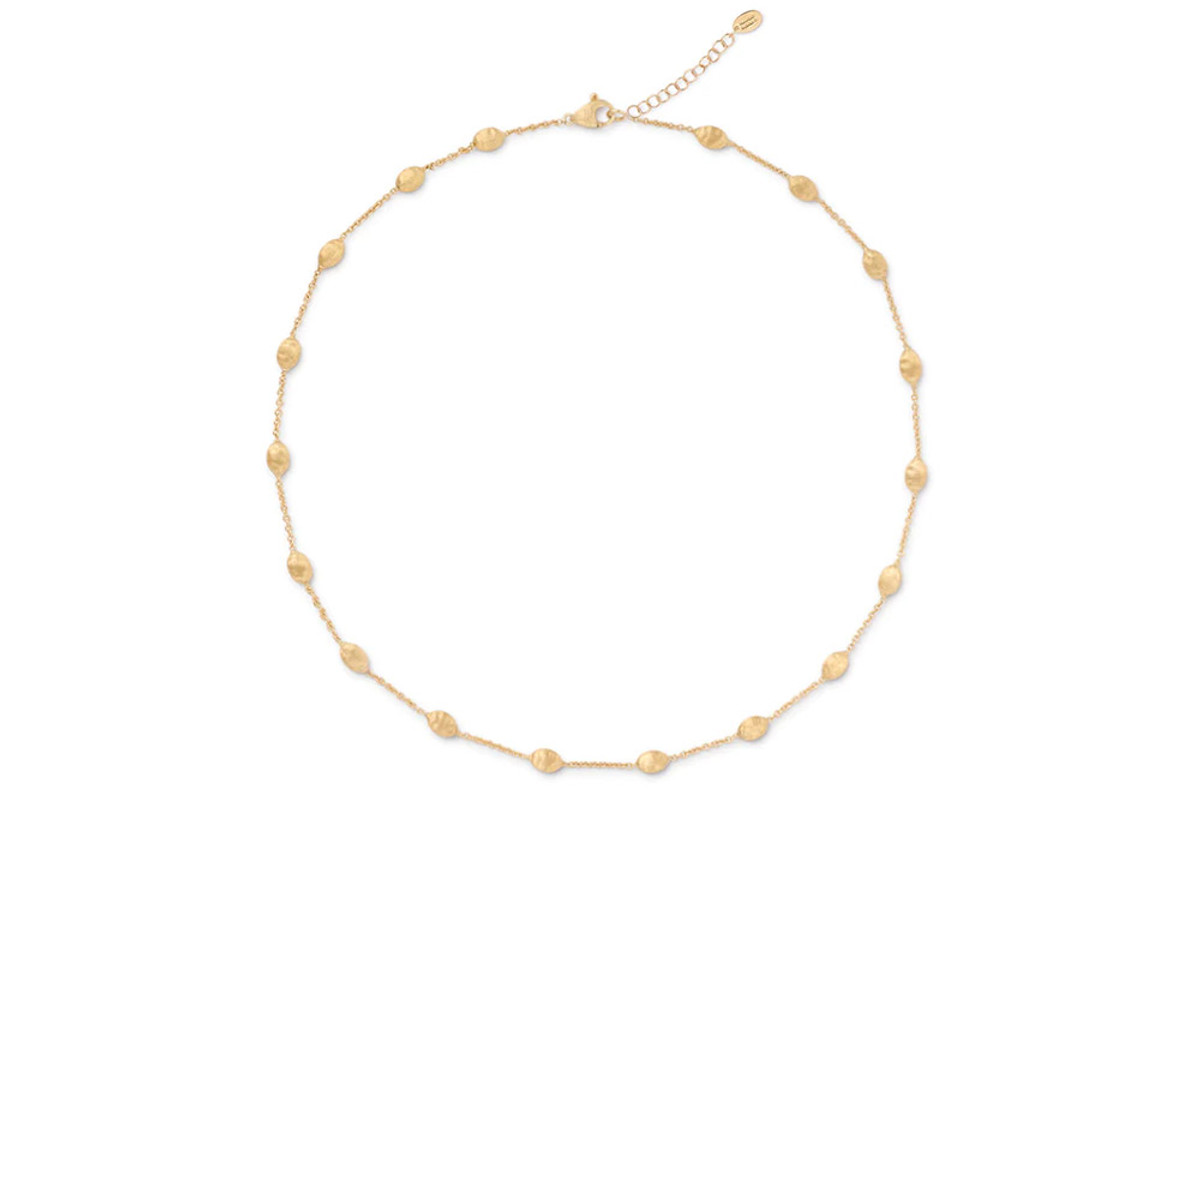 Marco Bicego Siviglia Collection 18K Yellow Gold Small Bead Short Necklace-50567 Product Image